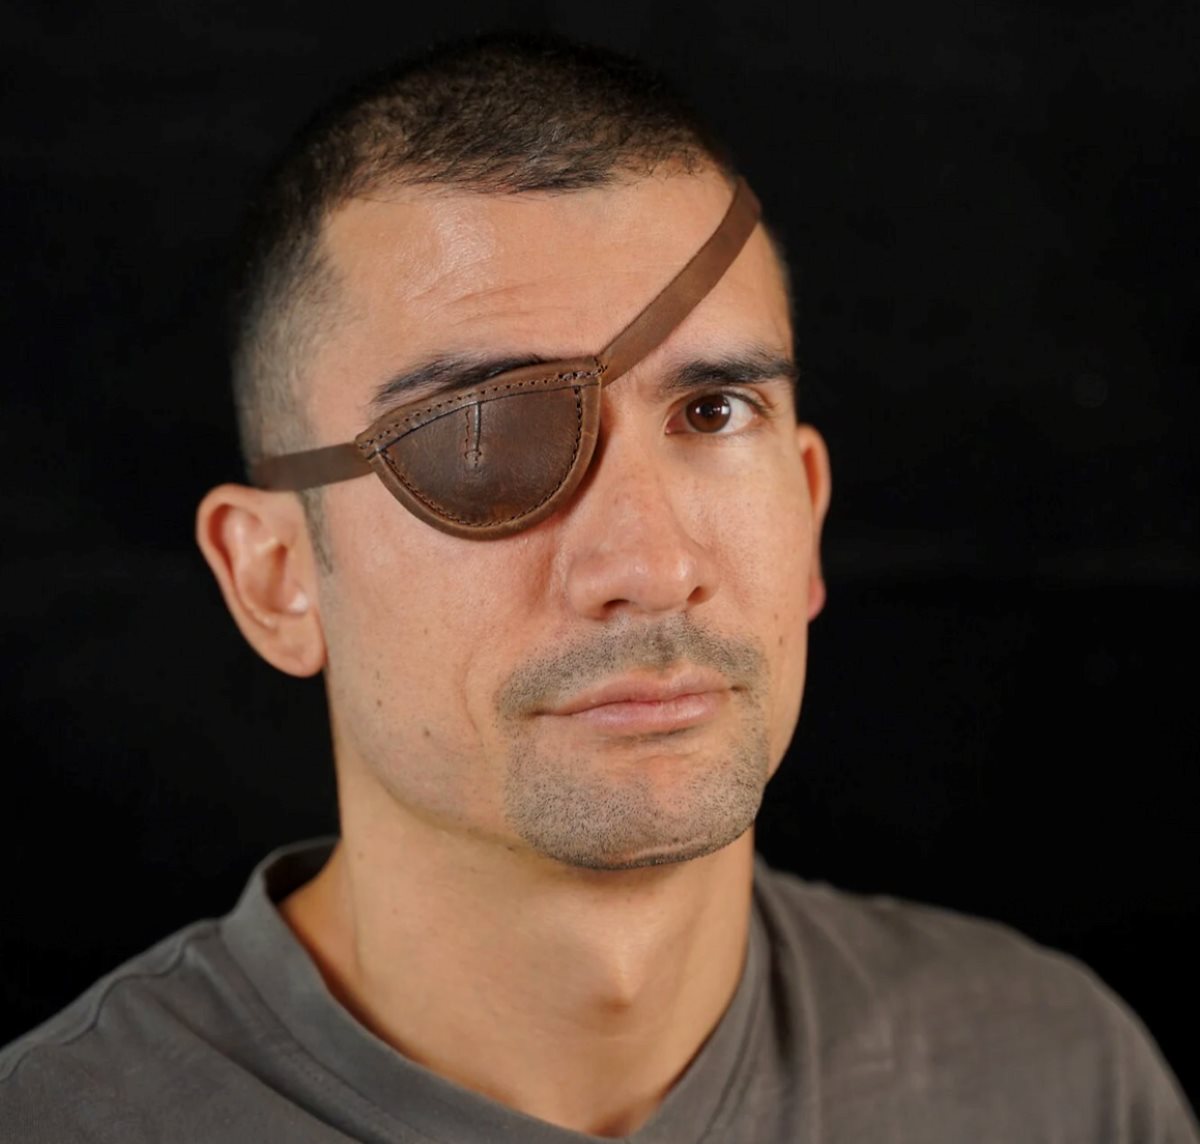 man wearing a leather eyepatch for decorative purposes